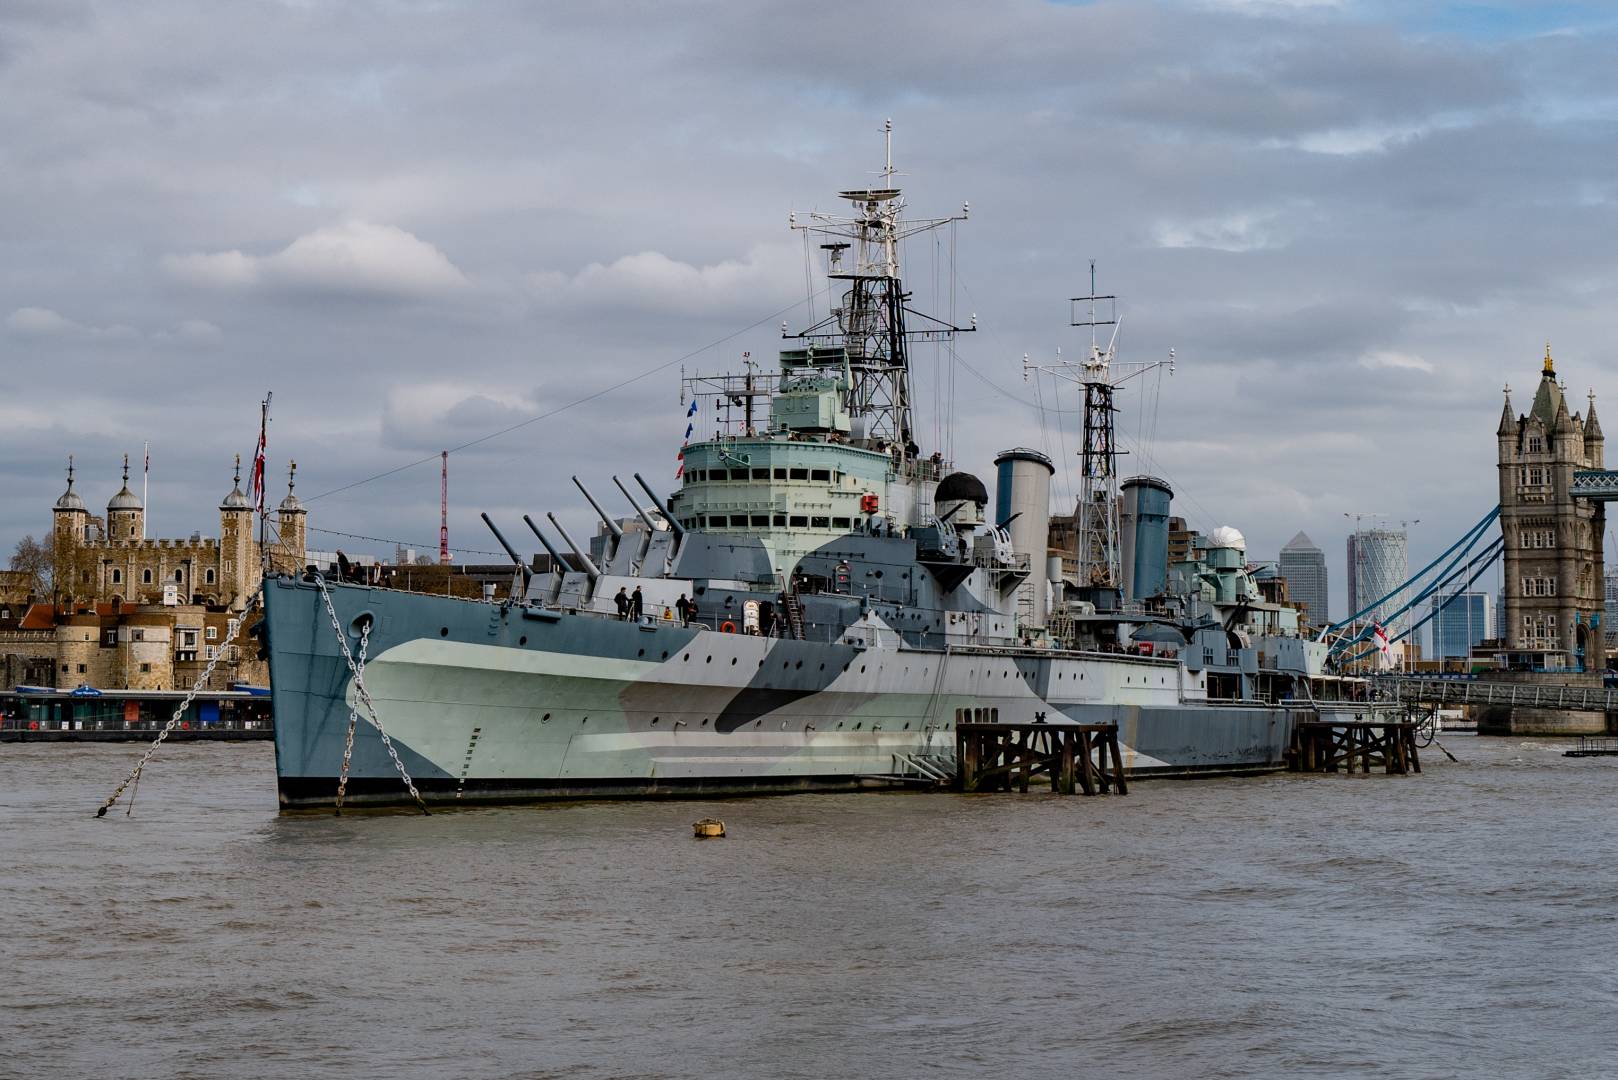 HMS Belfast flanked by the Tower of London and Tower Bridge, seen from Hay's Wharf. Just another snap from the versatile Q2